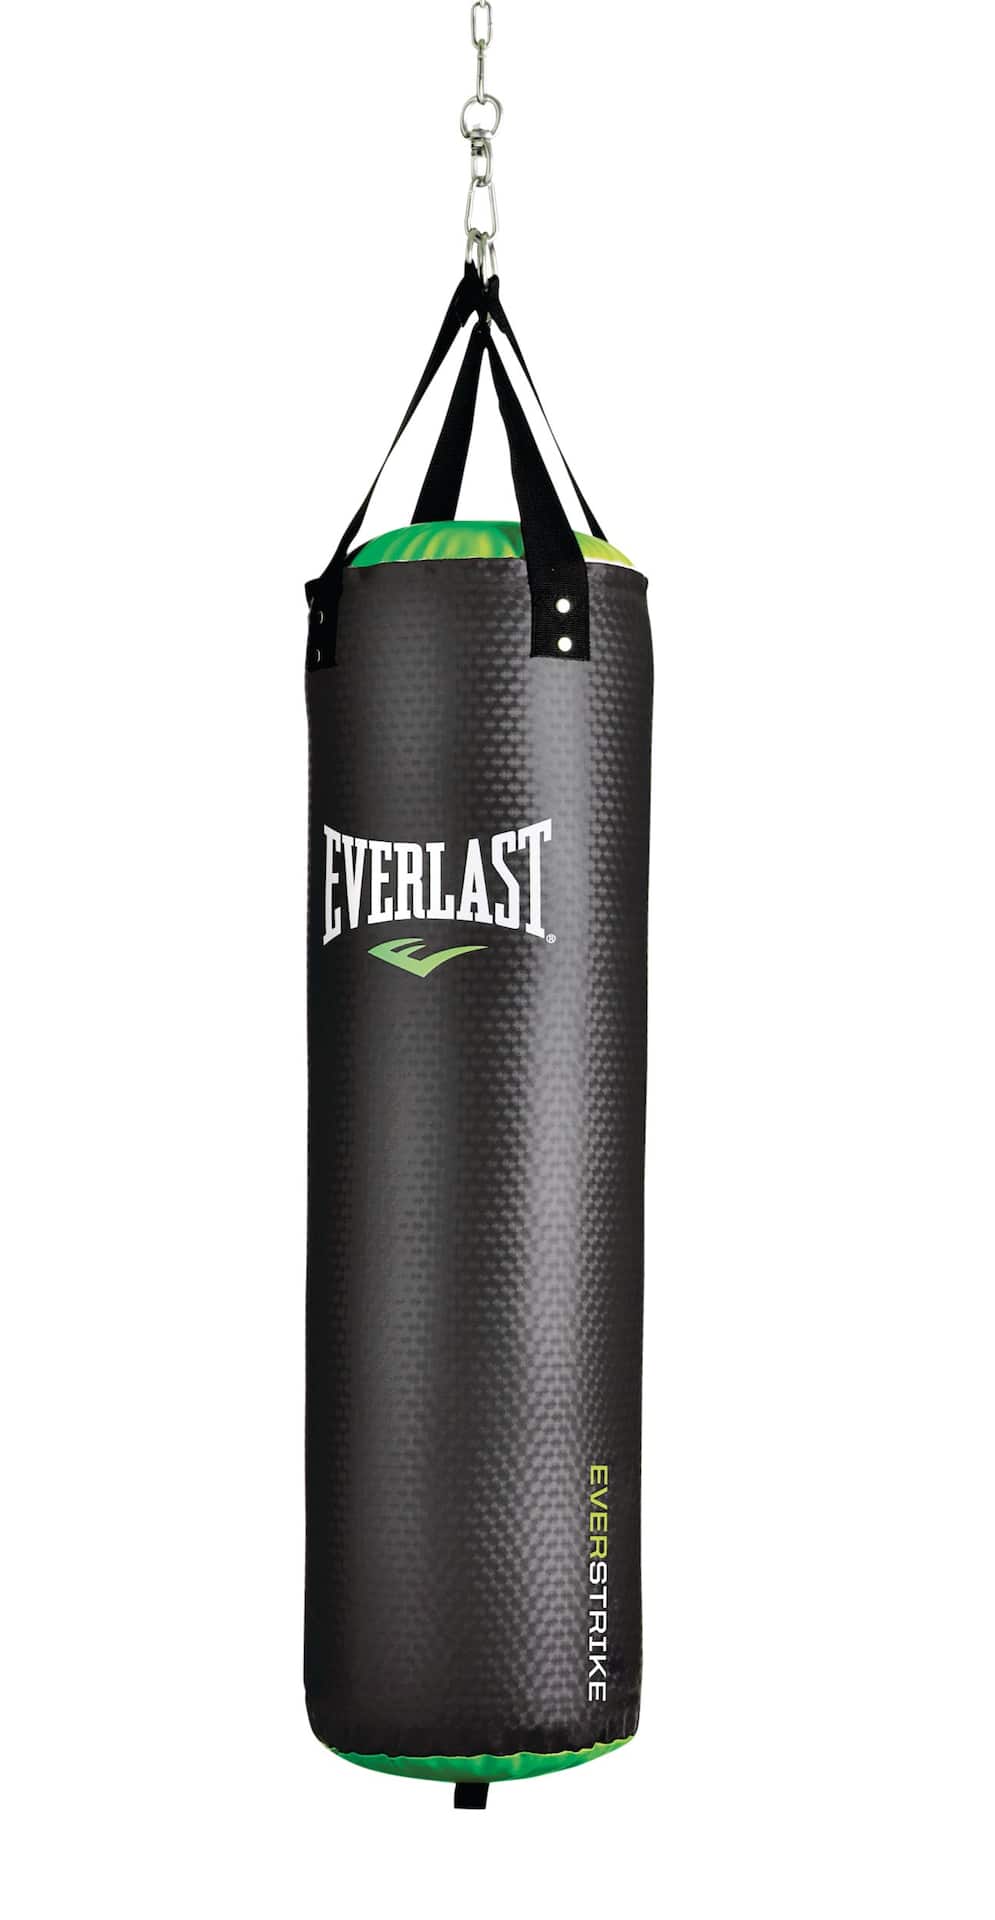 https://media-www.canadiantire.ca/product/playing/exercise/exercise-accessories/0845907/everlast-70lb-everstrike-heavy-bag-53c27fb2-8f95-4ceb-9b0e-6d1fc8efc7cd-jpgrendition.jpg